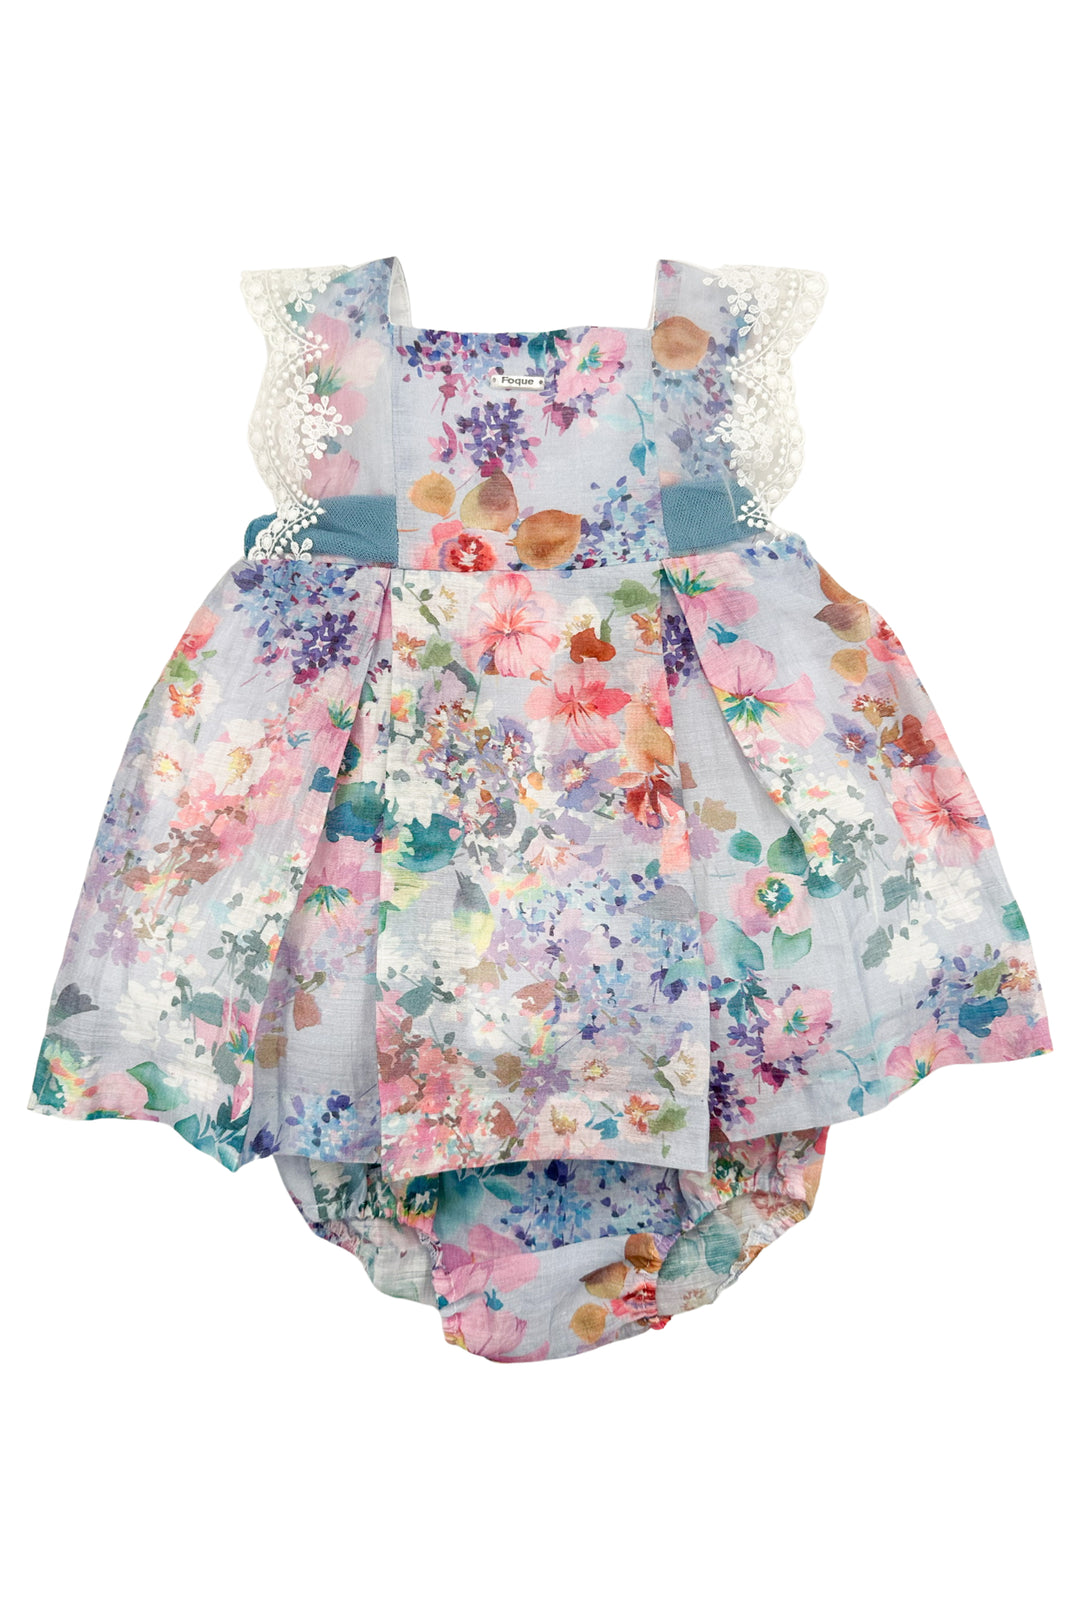 Foque PREORDER "Rosa" Purple Floral Lace Dress & Bloomers | Millie and John